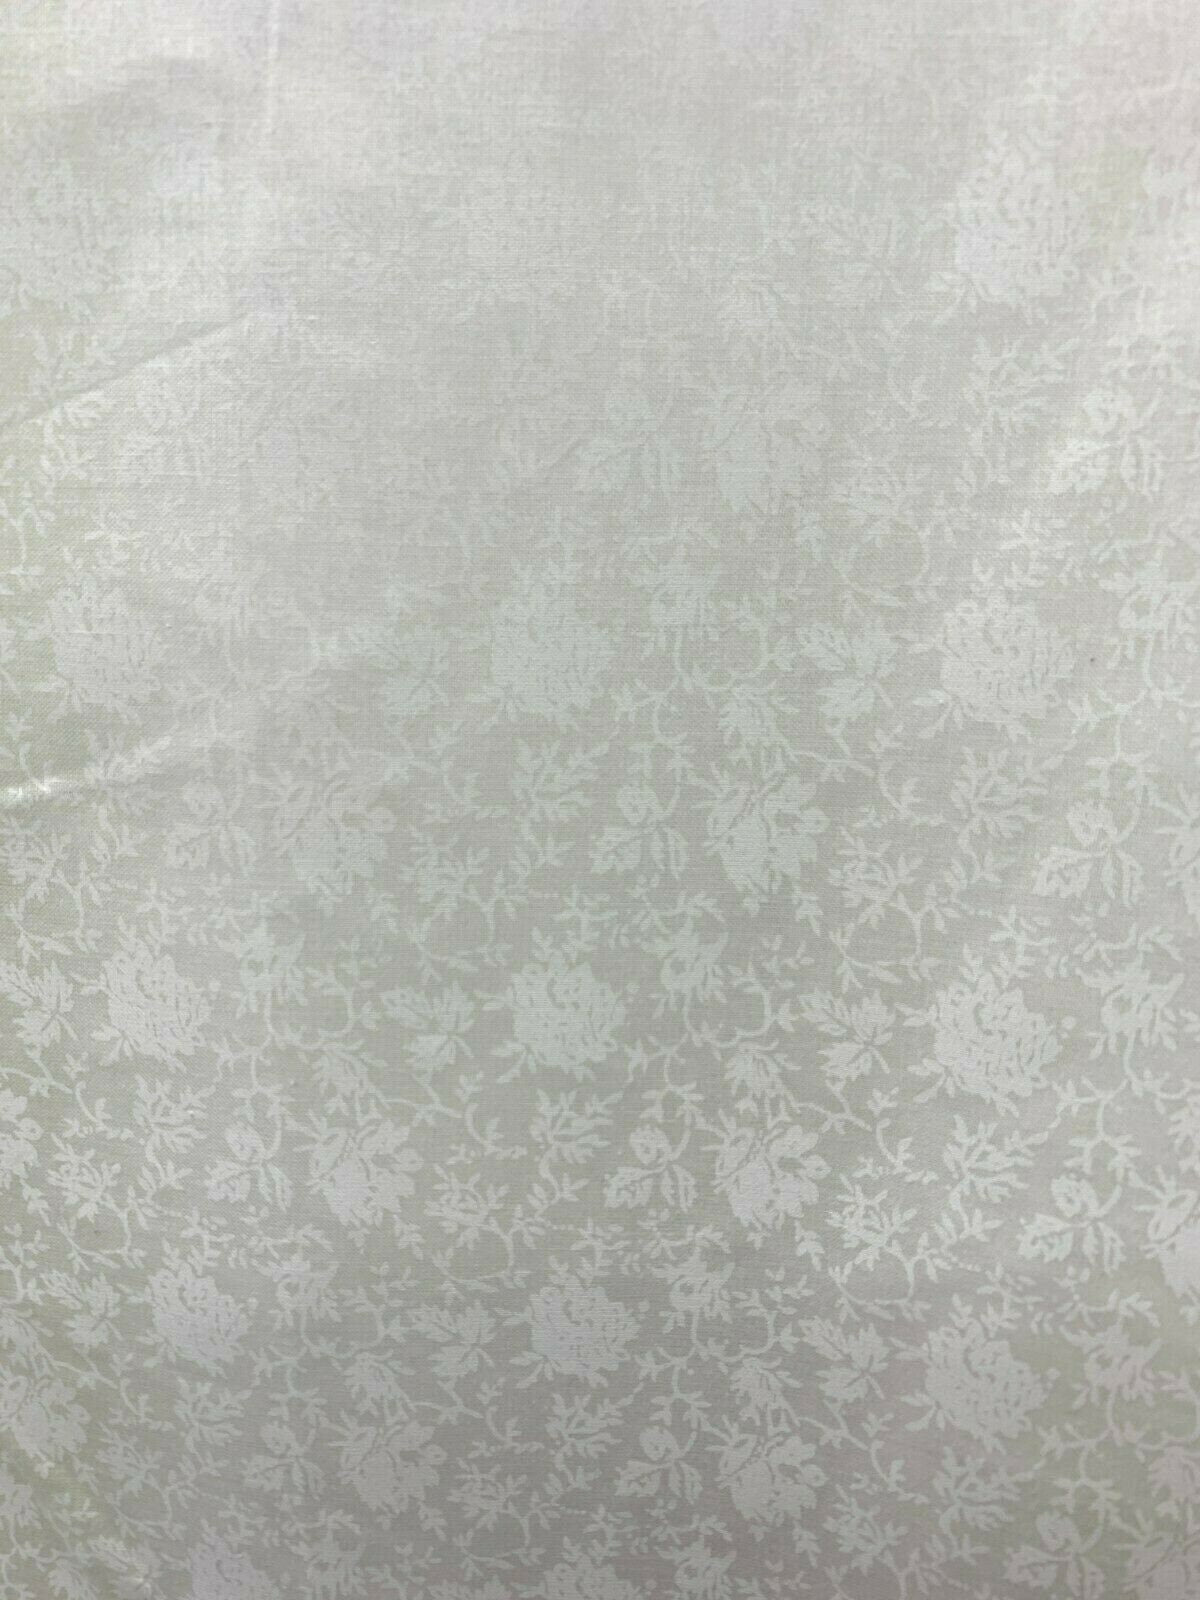 WHITE Floral Printed 100% Cotton Fabric (45 in.) Sold By The Yard